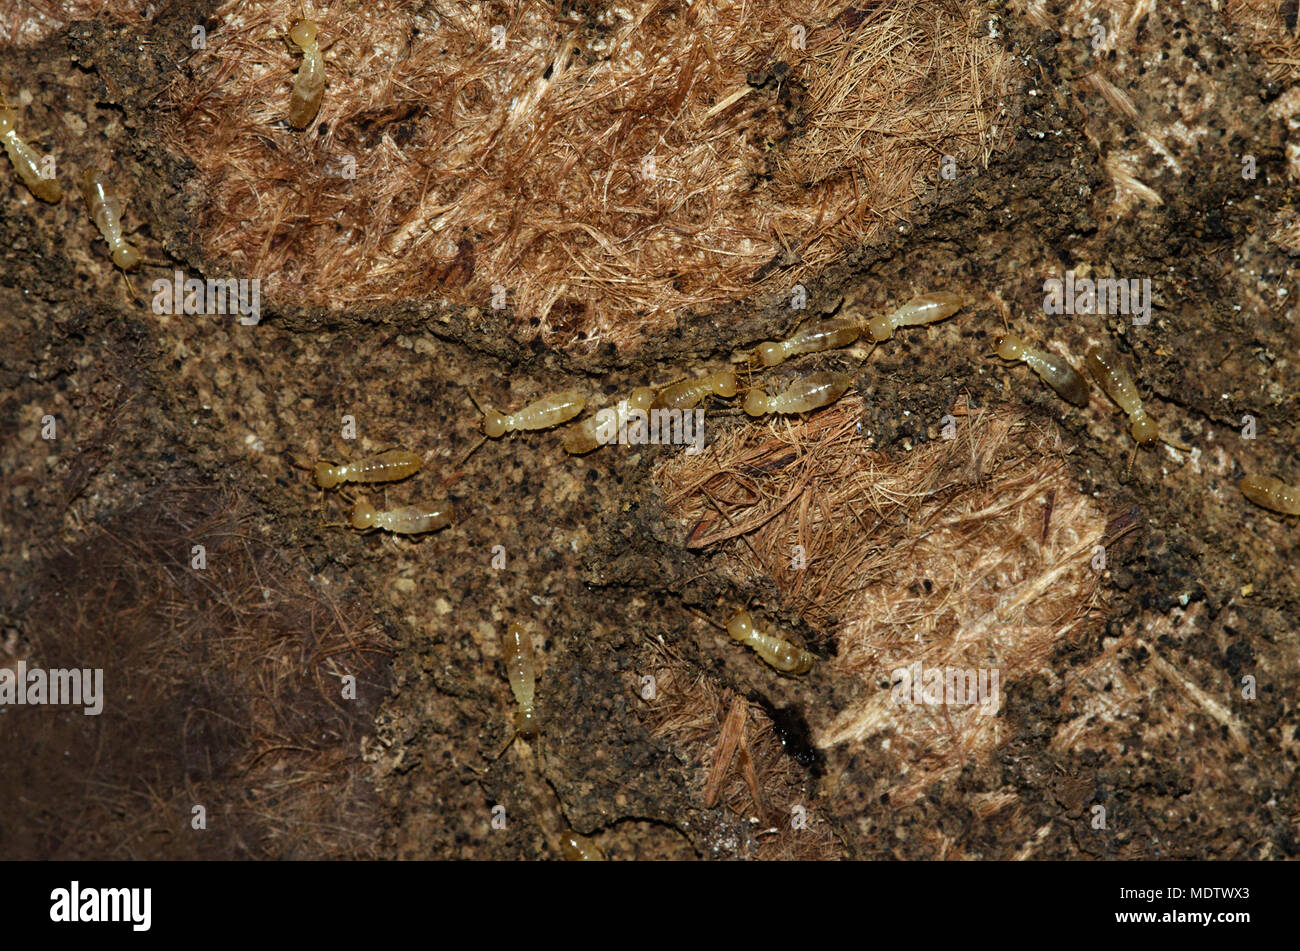 Termite workers of Kalotermes flavicollis species tunneling of an old ...